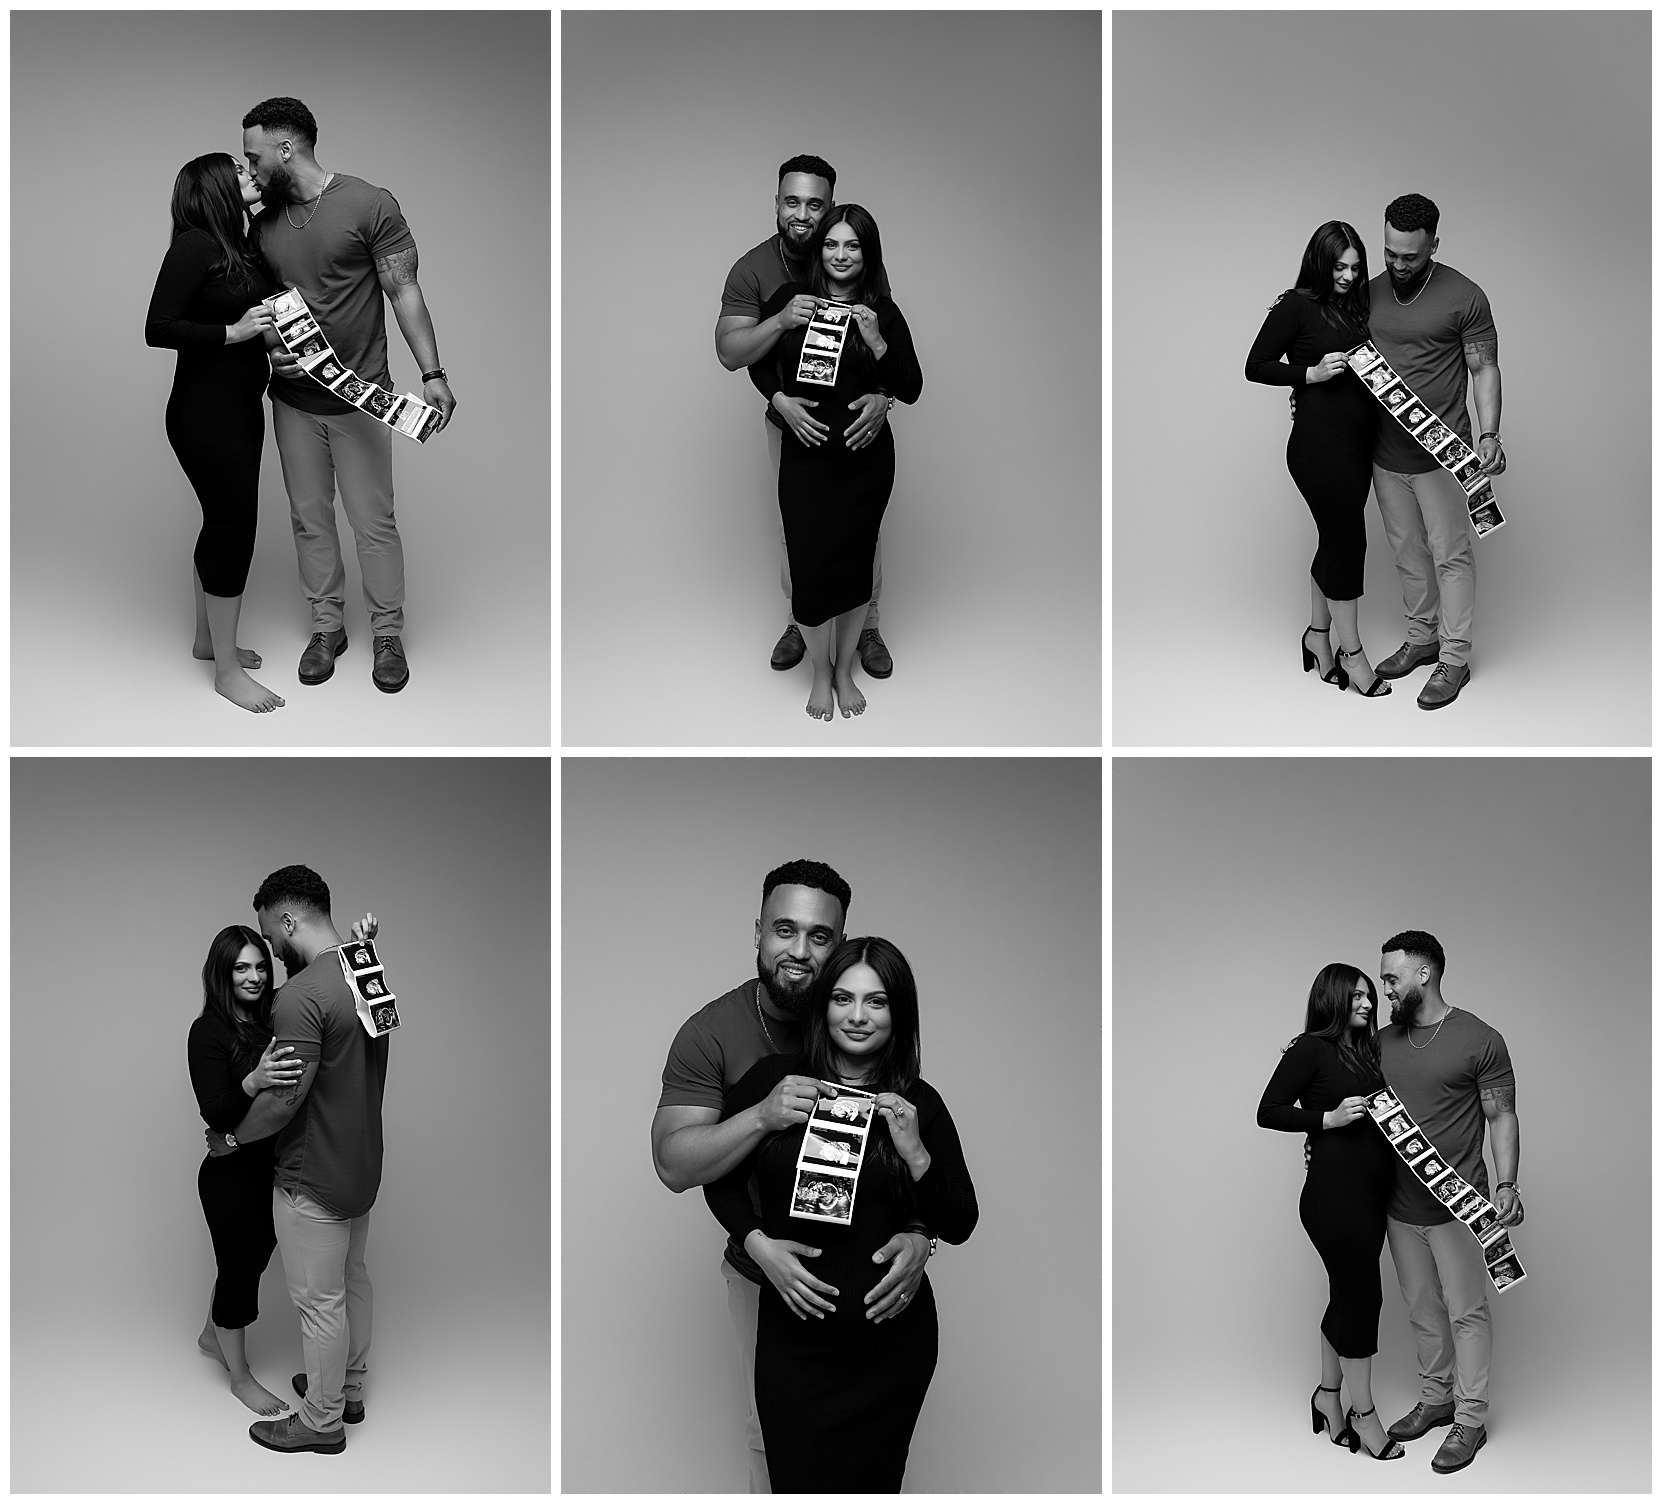 A series of black and white maternity photos featuring a man and a woman showcasing their sonogram photos